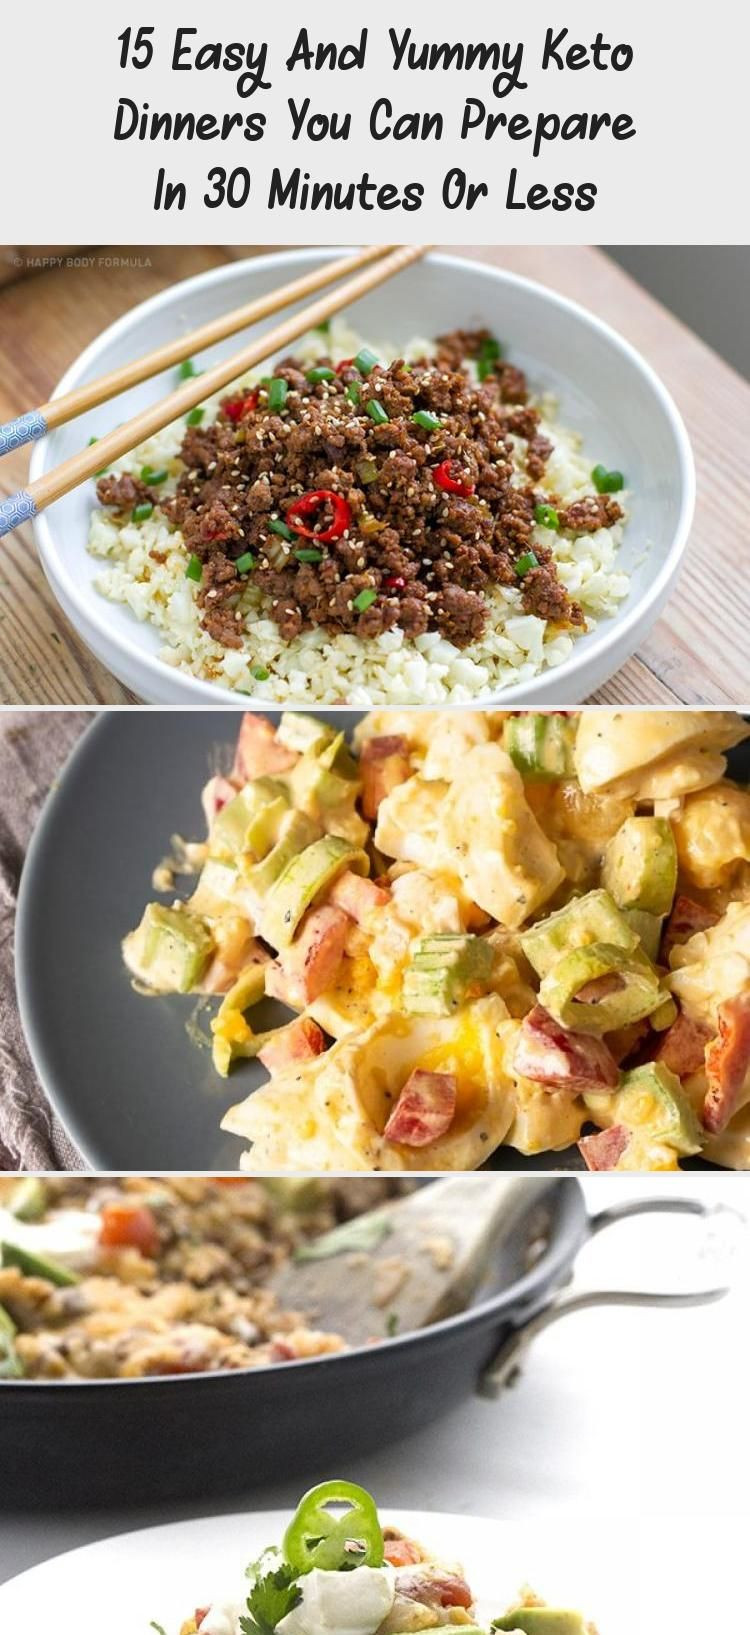 Atkins Dinners Ideas
 Looking for quick and delicious dinner ideas on keto